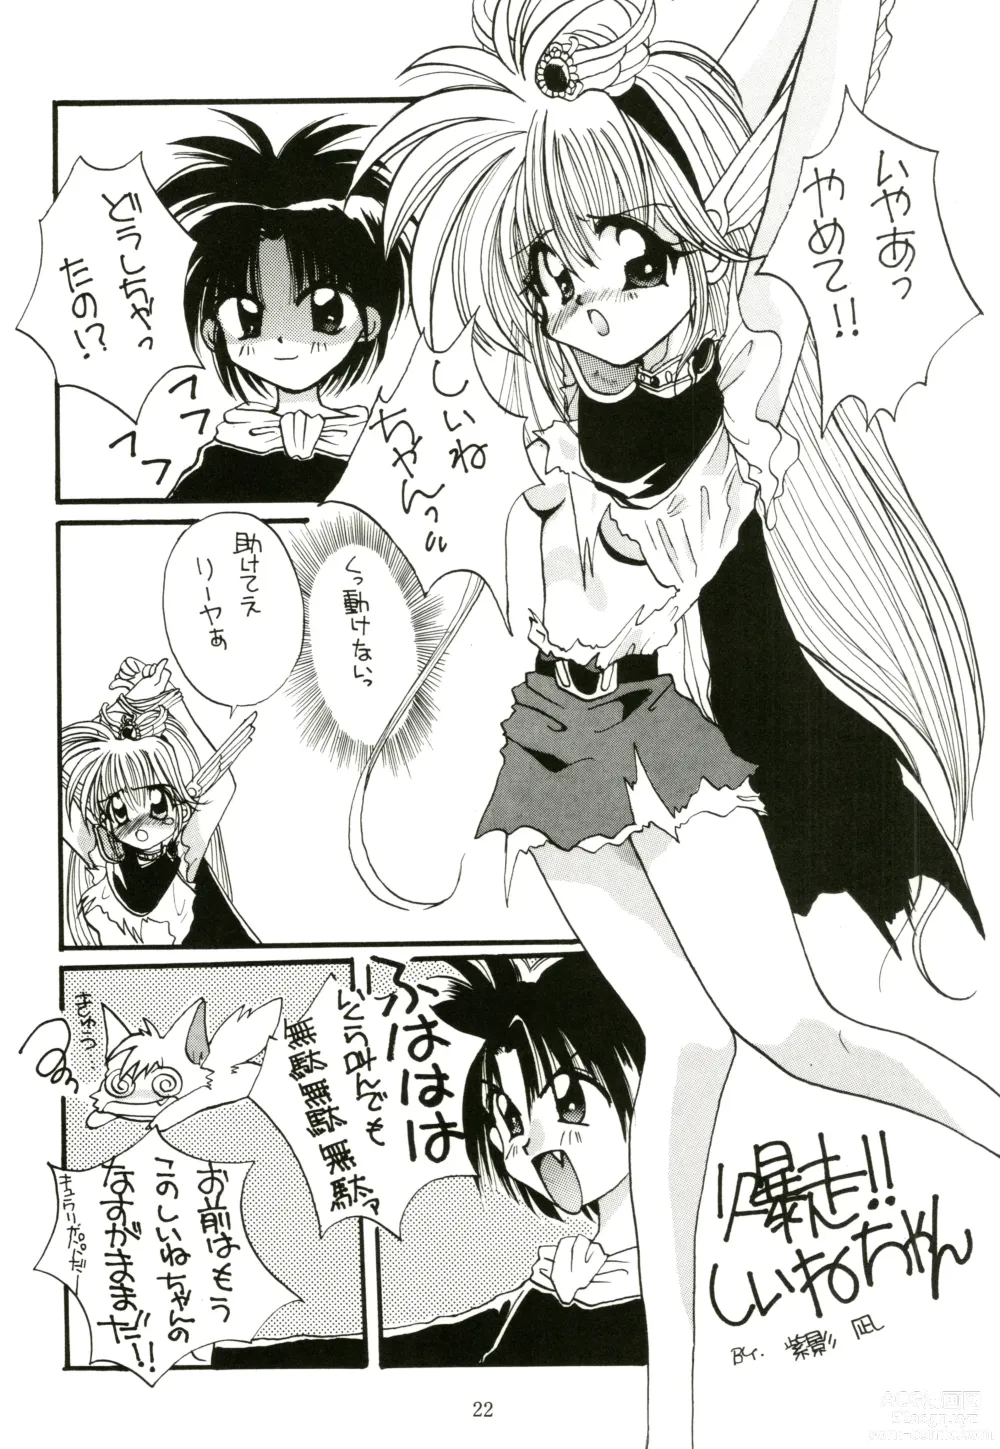 Page 24 of doujinshi PROMINENT 4